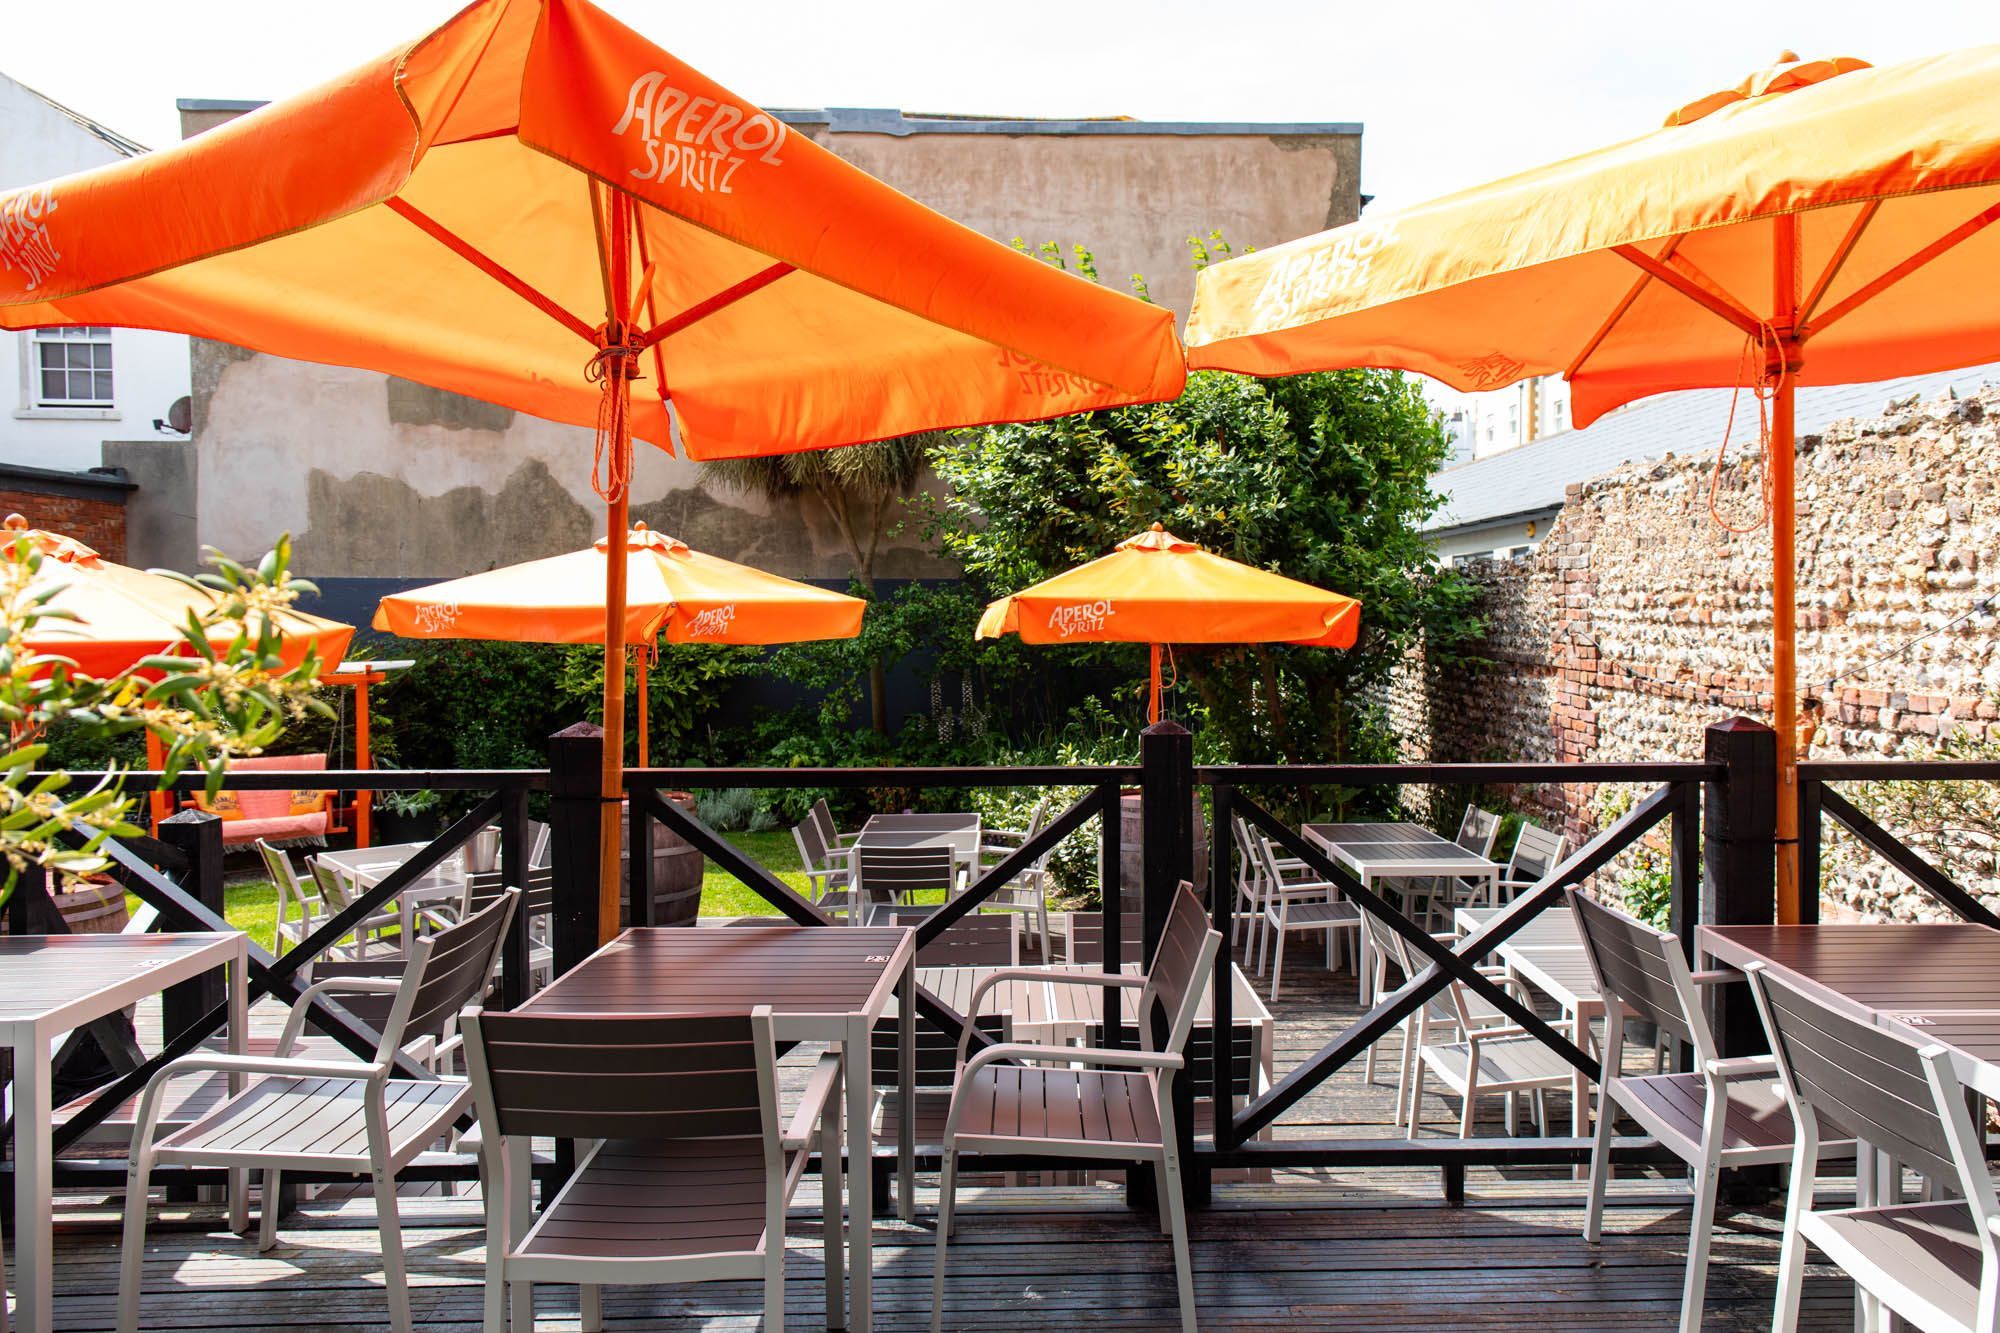 shot of the garden, brown chairs and tables with orange sun umbrellas